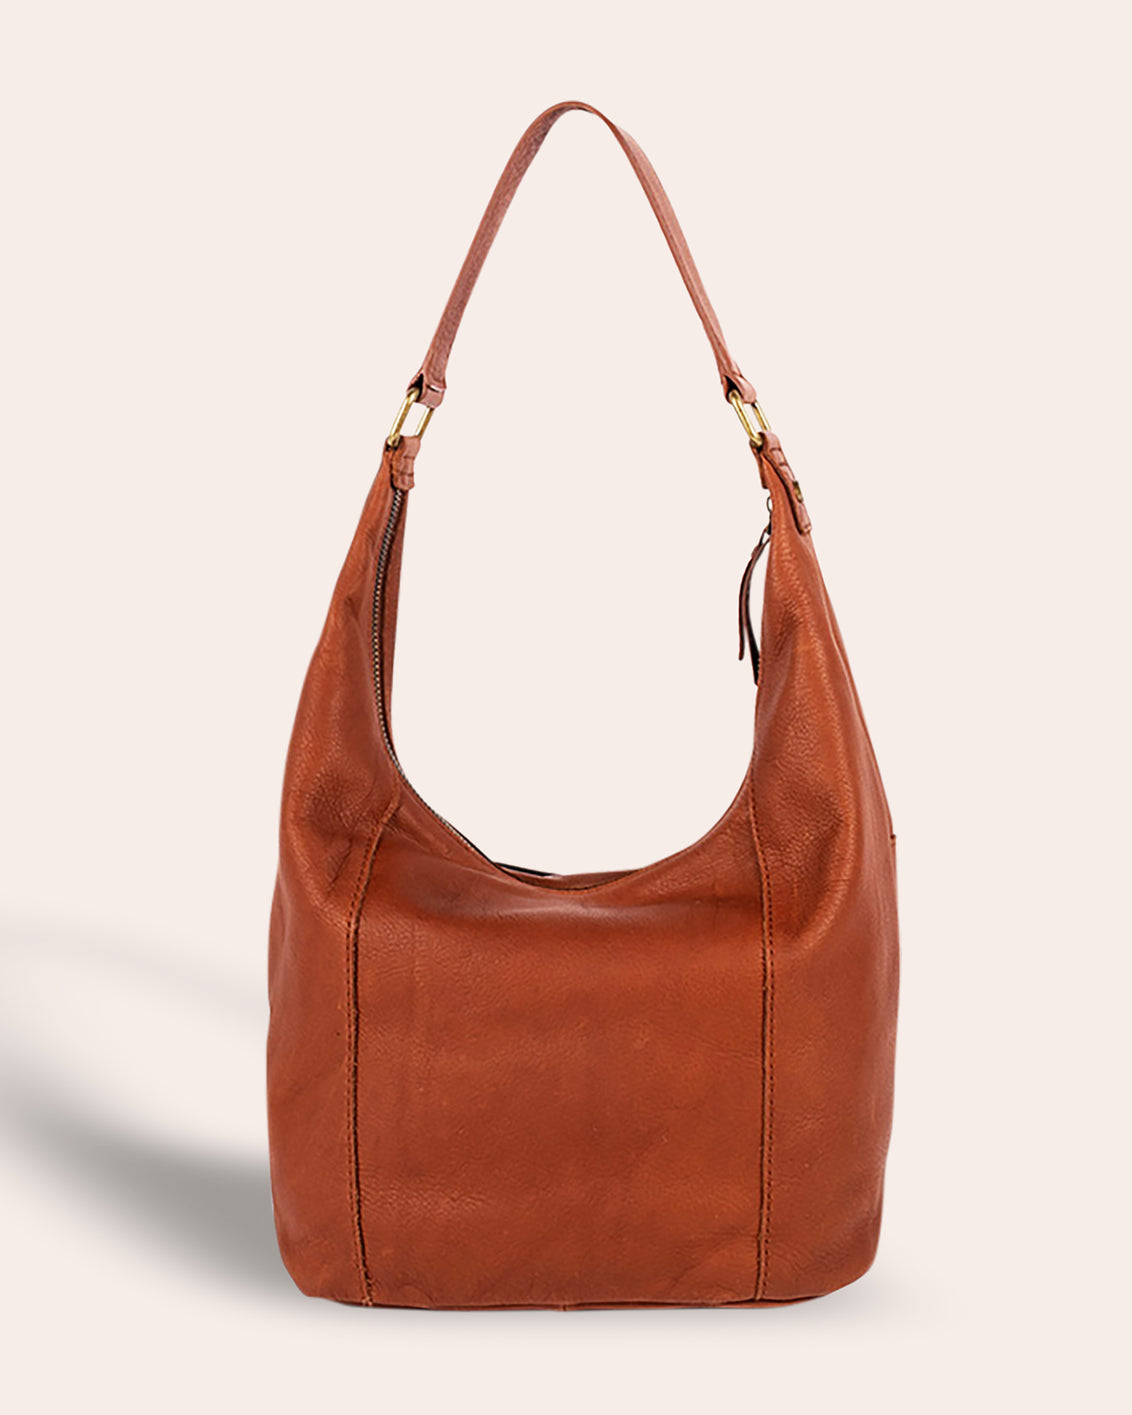 American Leather Co. Carrie Hobo Brandy